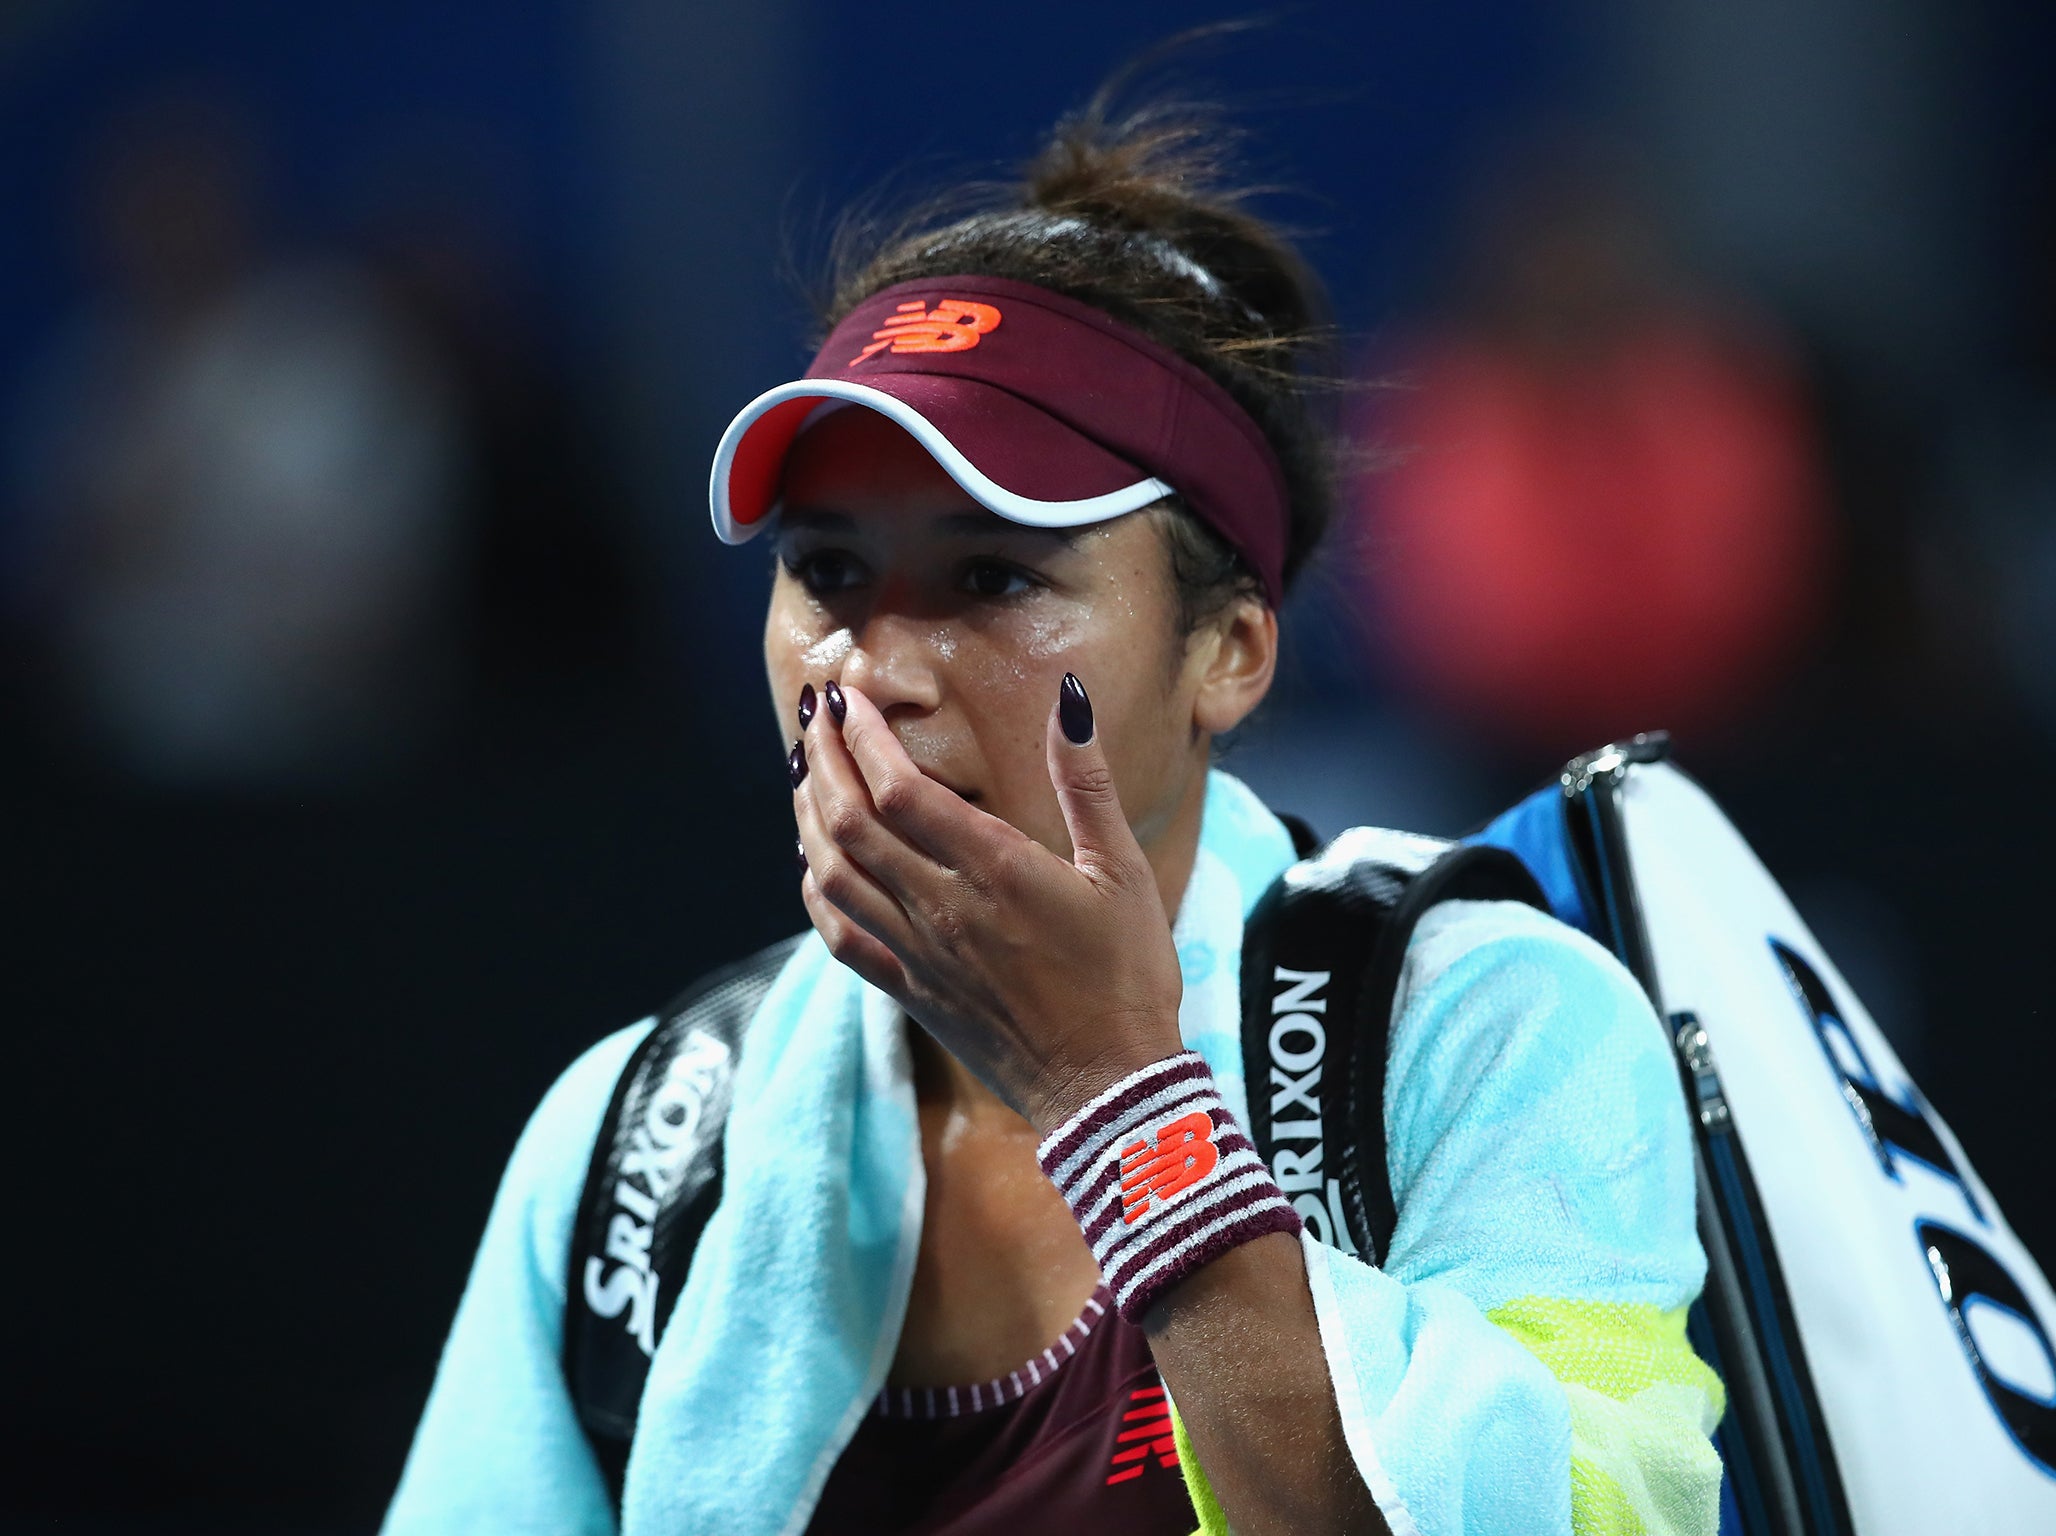 Heather Watson could not make it beyond the first round